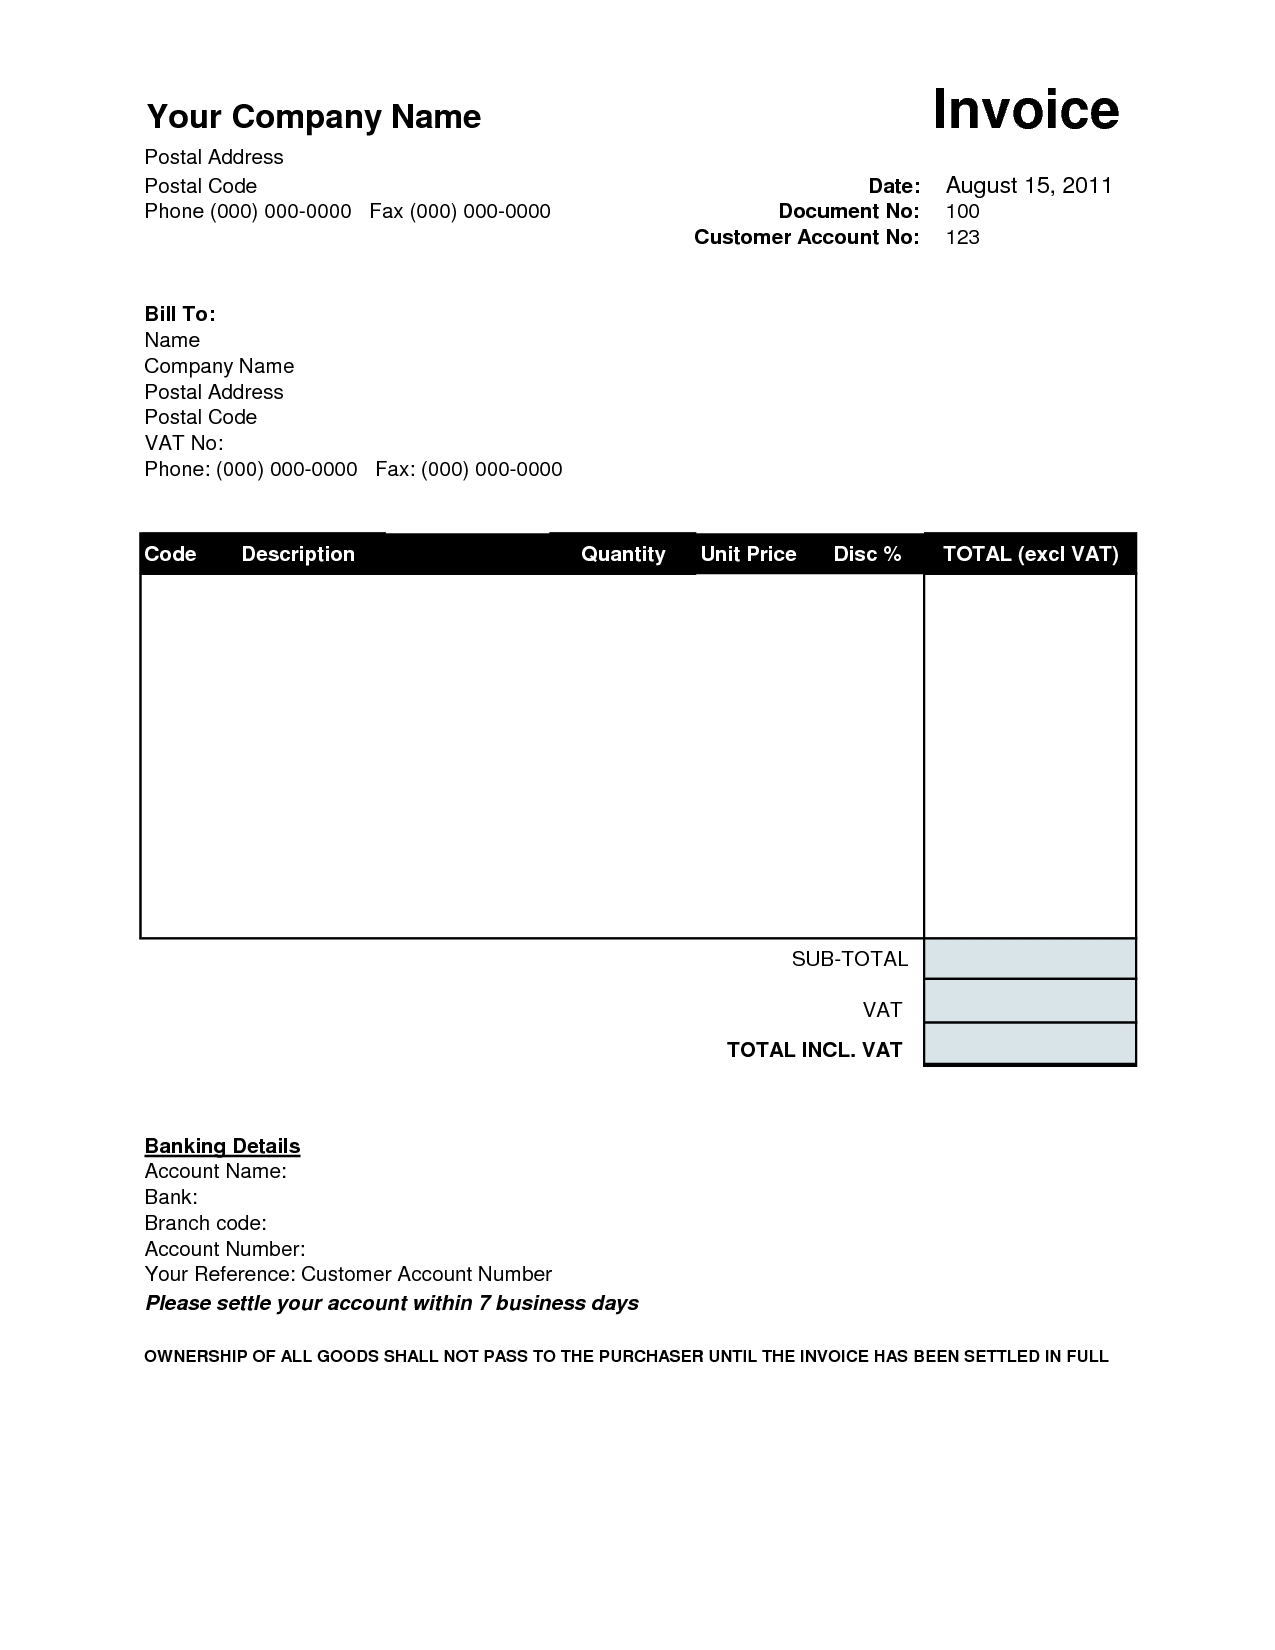 brooklyn steak co free home business invoice template online invoice template free